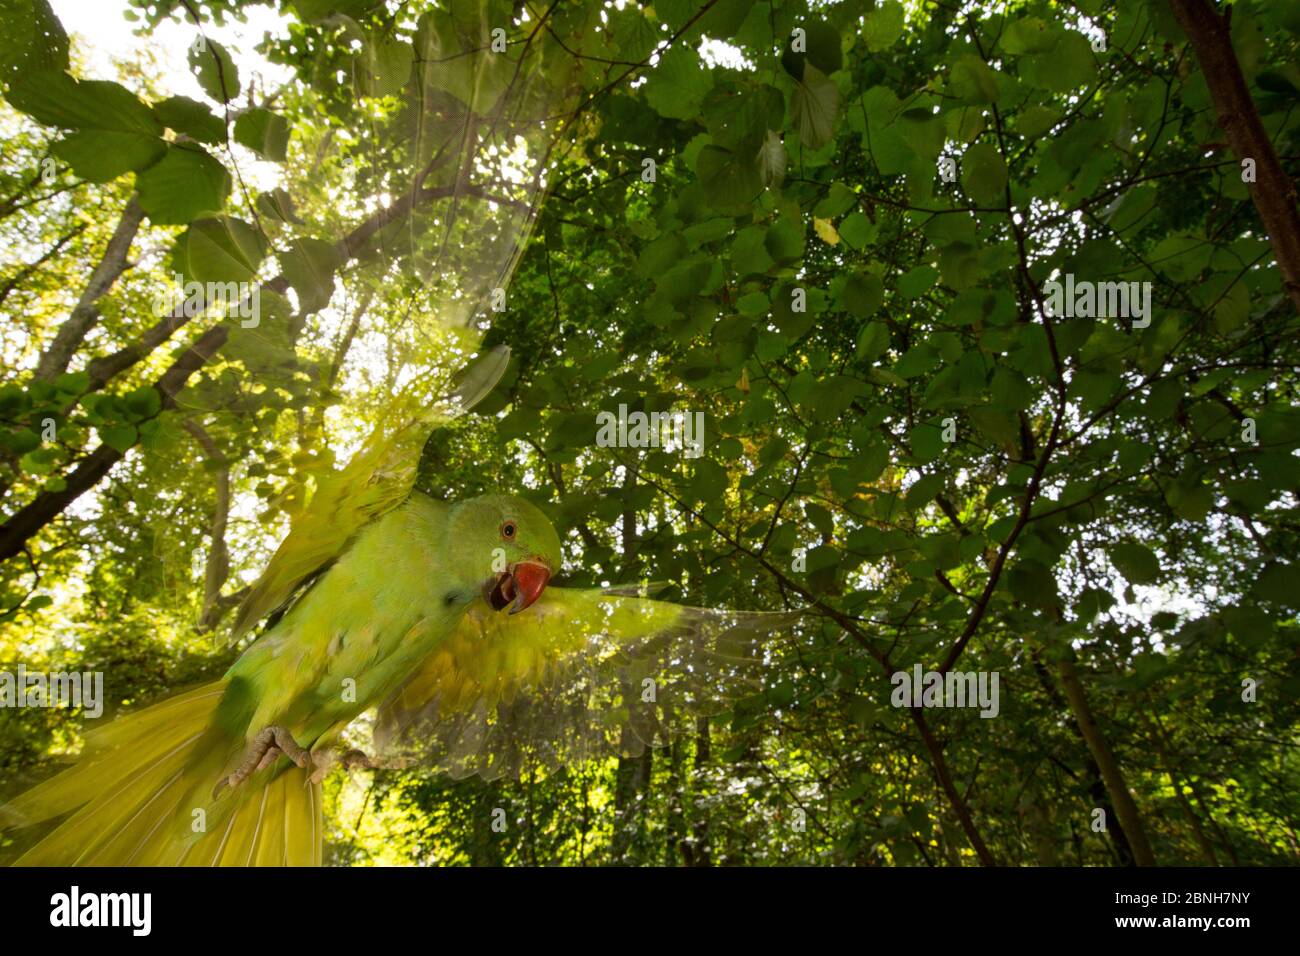 Rose-ringed Parakeet  (Psittacula krameri) introduced species, blurred motion of flying in front of tree, Paris region, France, August Stock Photo